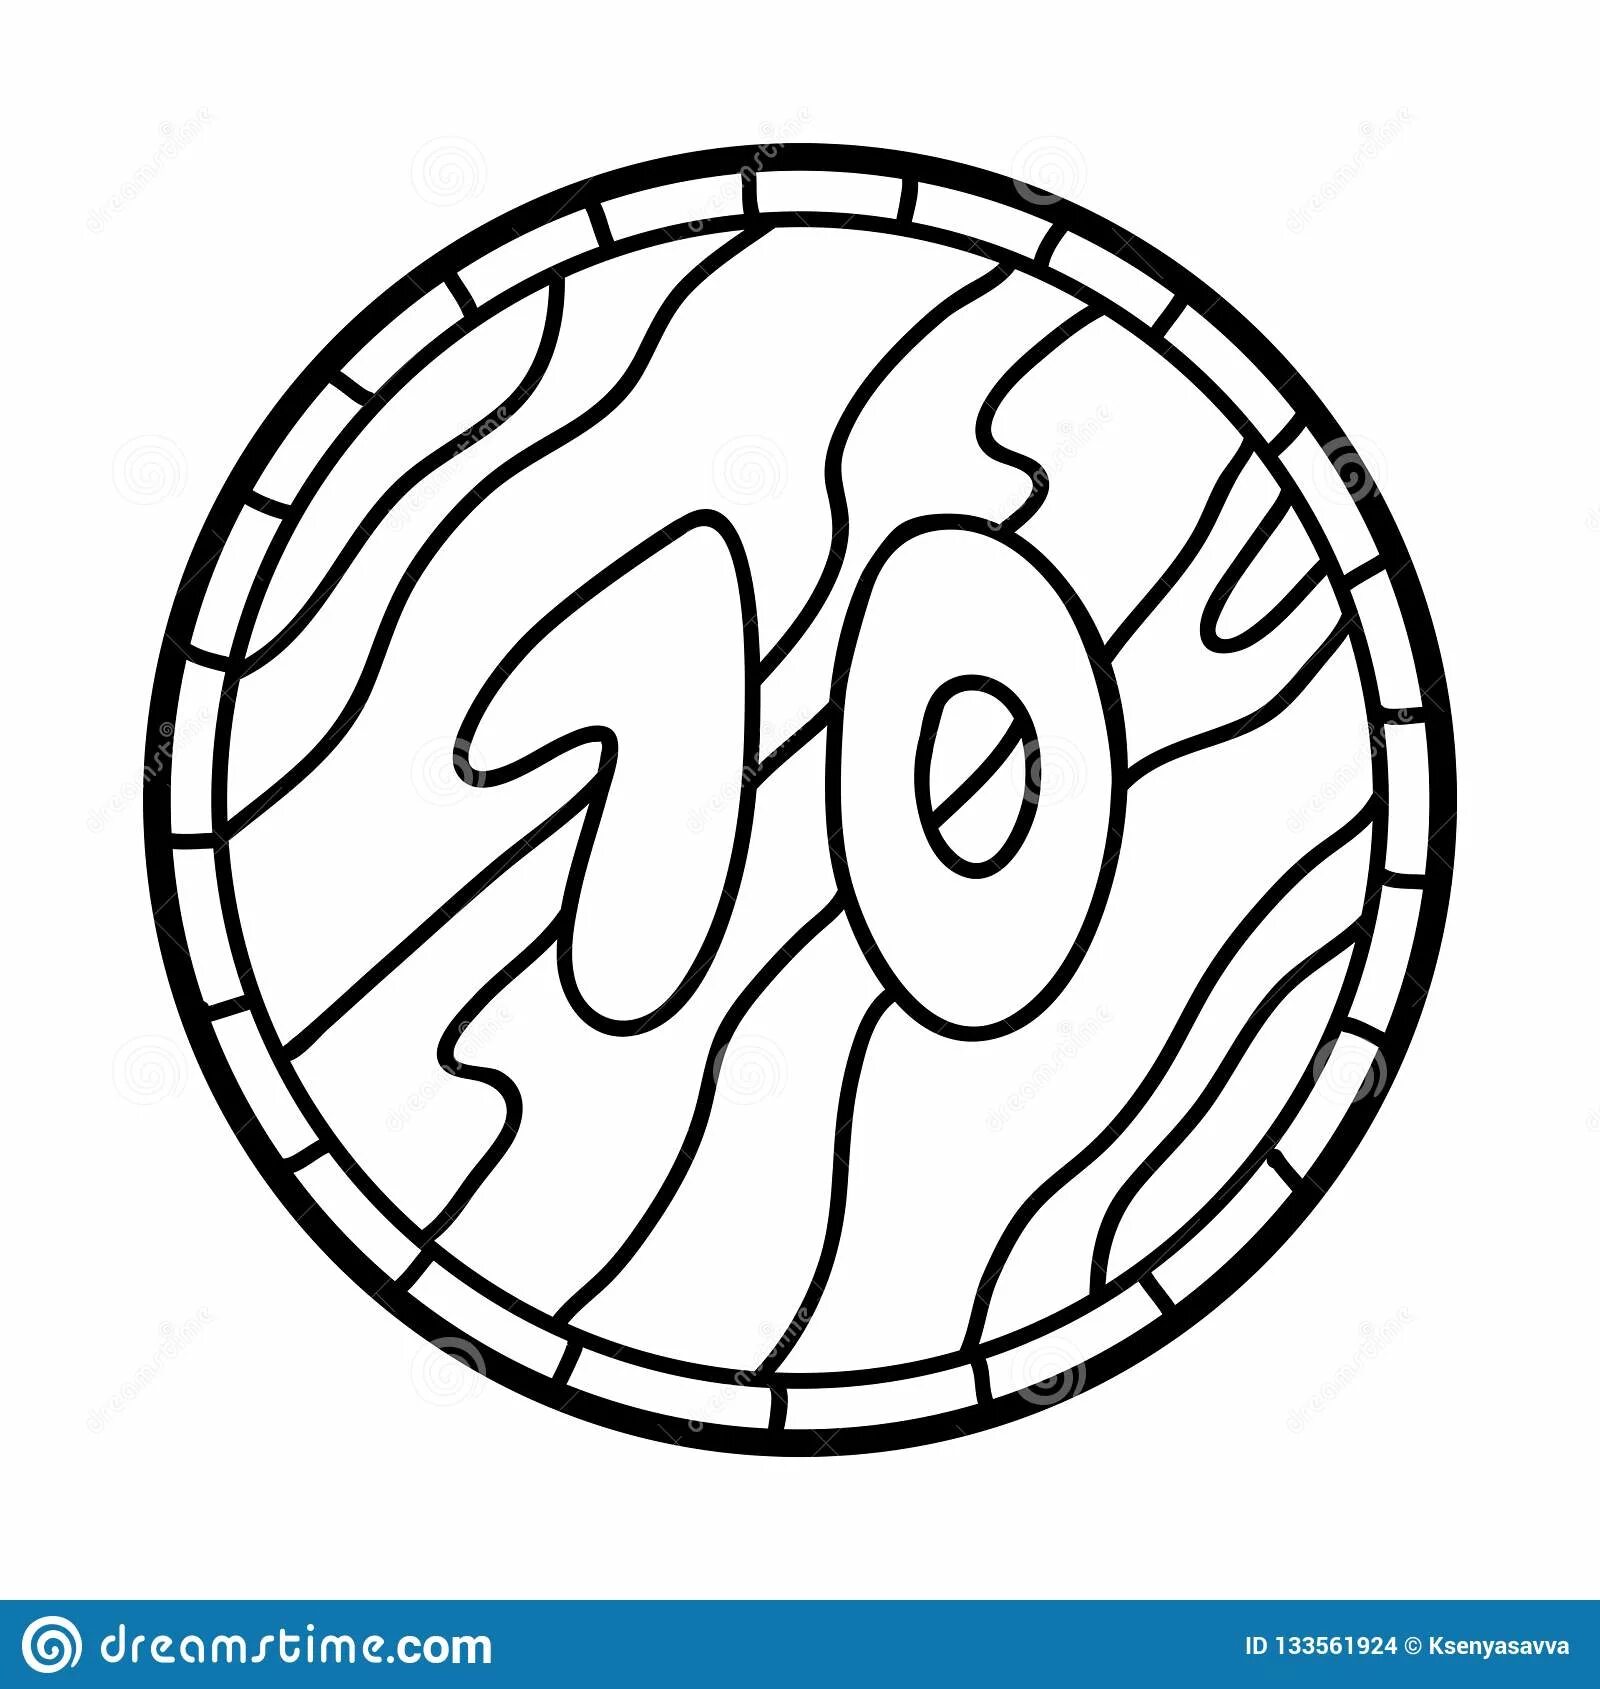 Coloring page playful coin 10 rubles